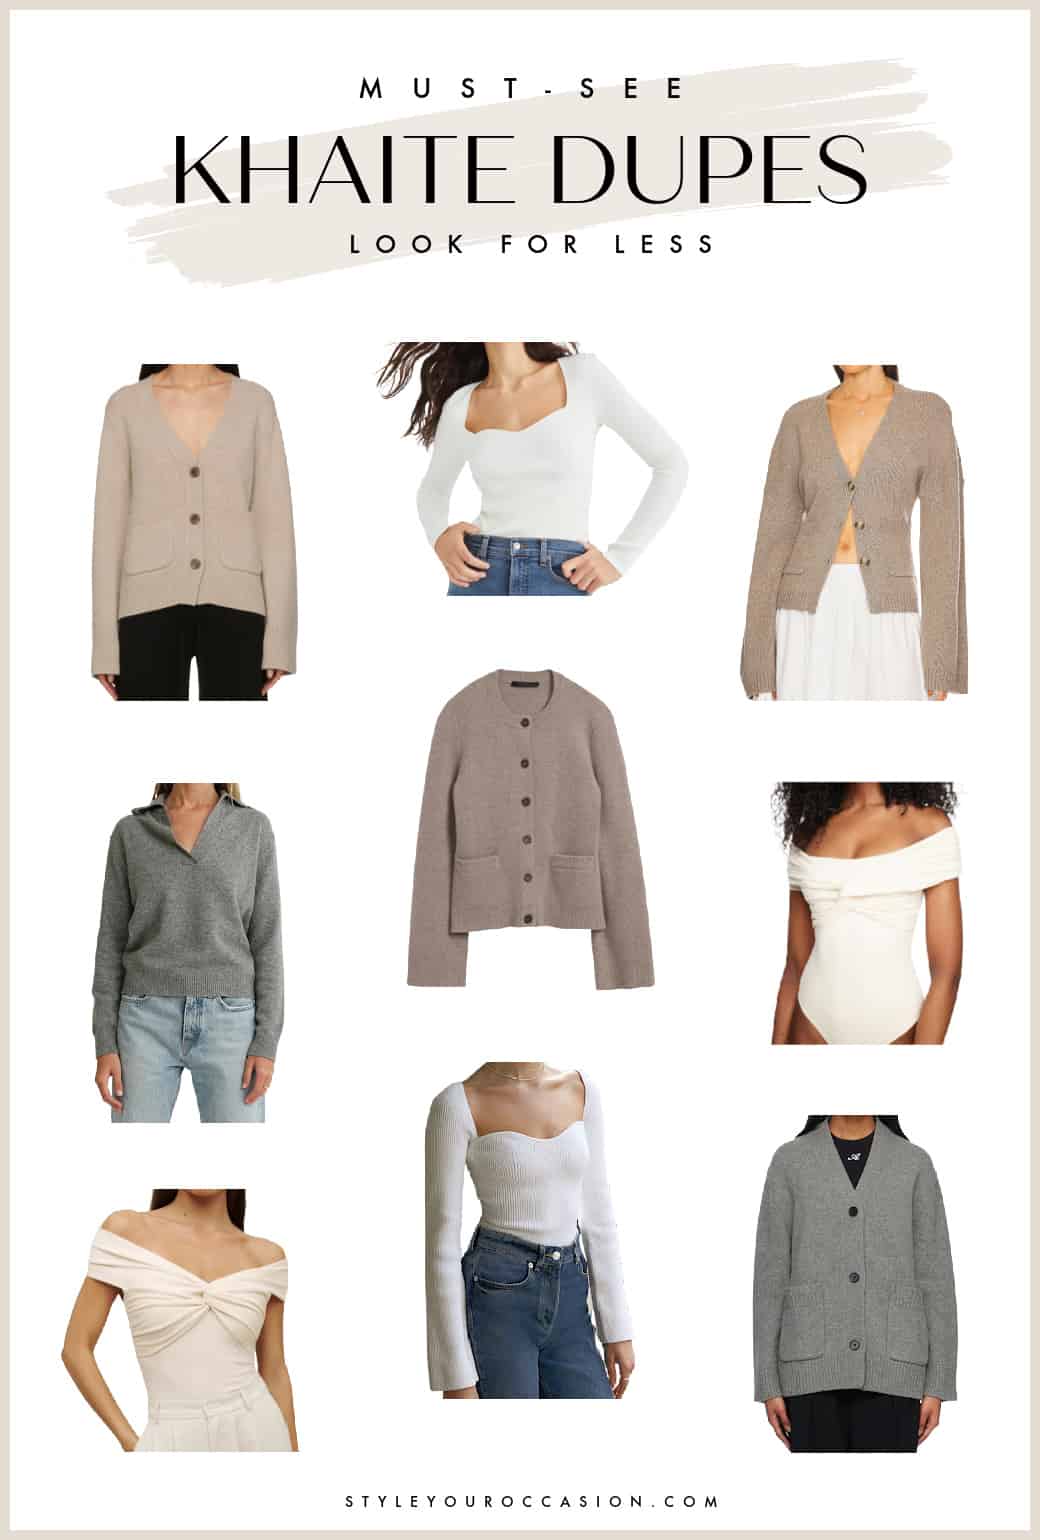 Pinterest collage of nine cardigan sweaters, knit tops, and off-the-shoulder tops that are dupes of the Khaite brand pieces